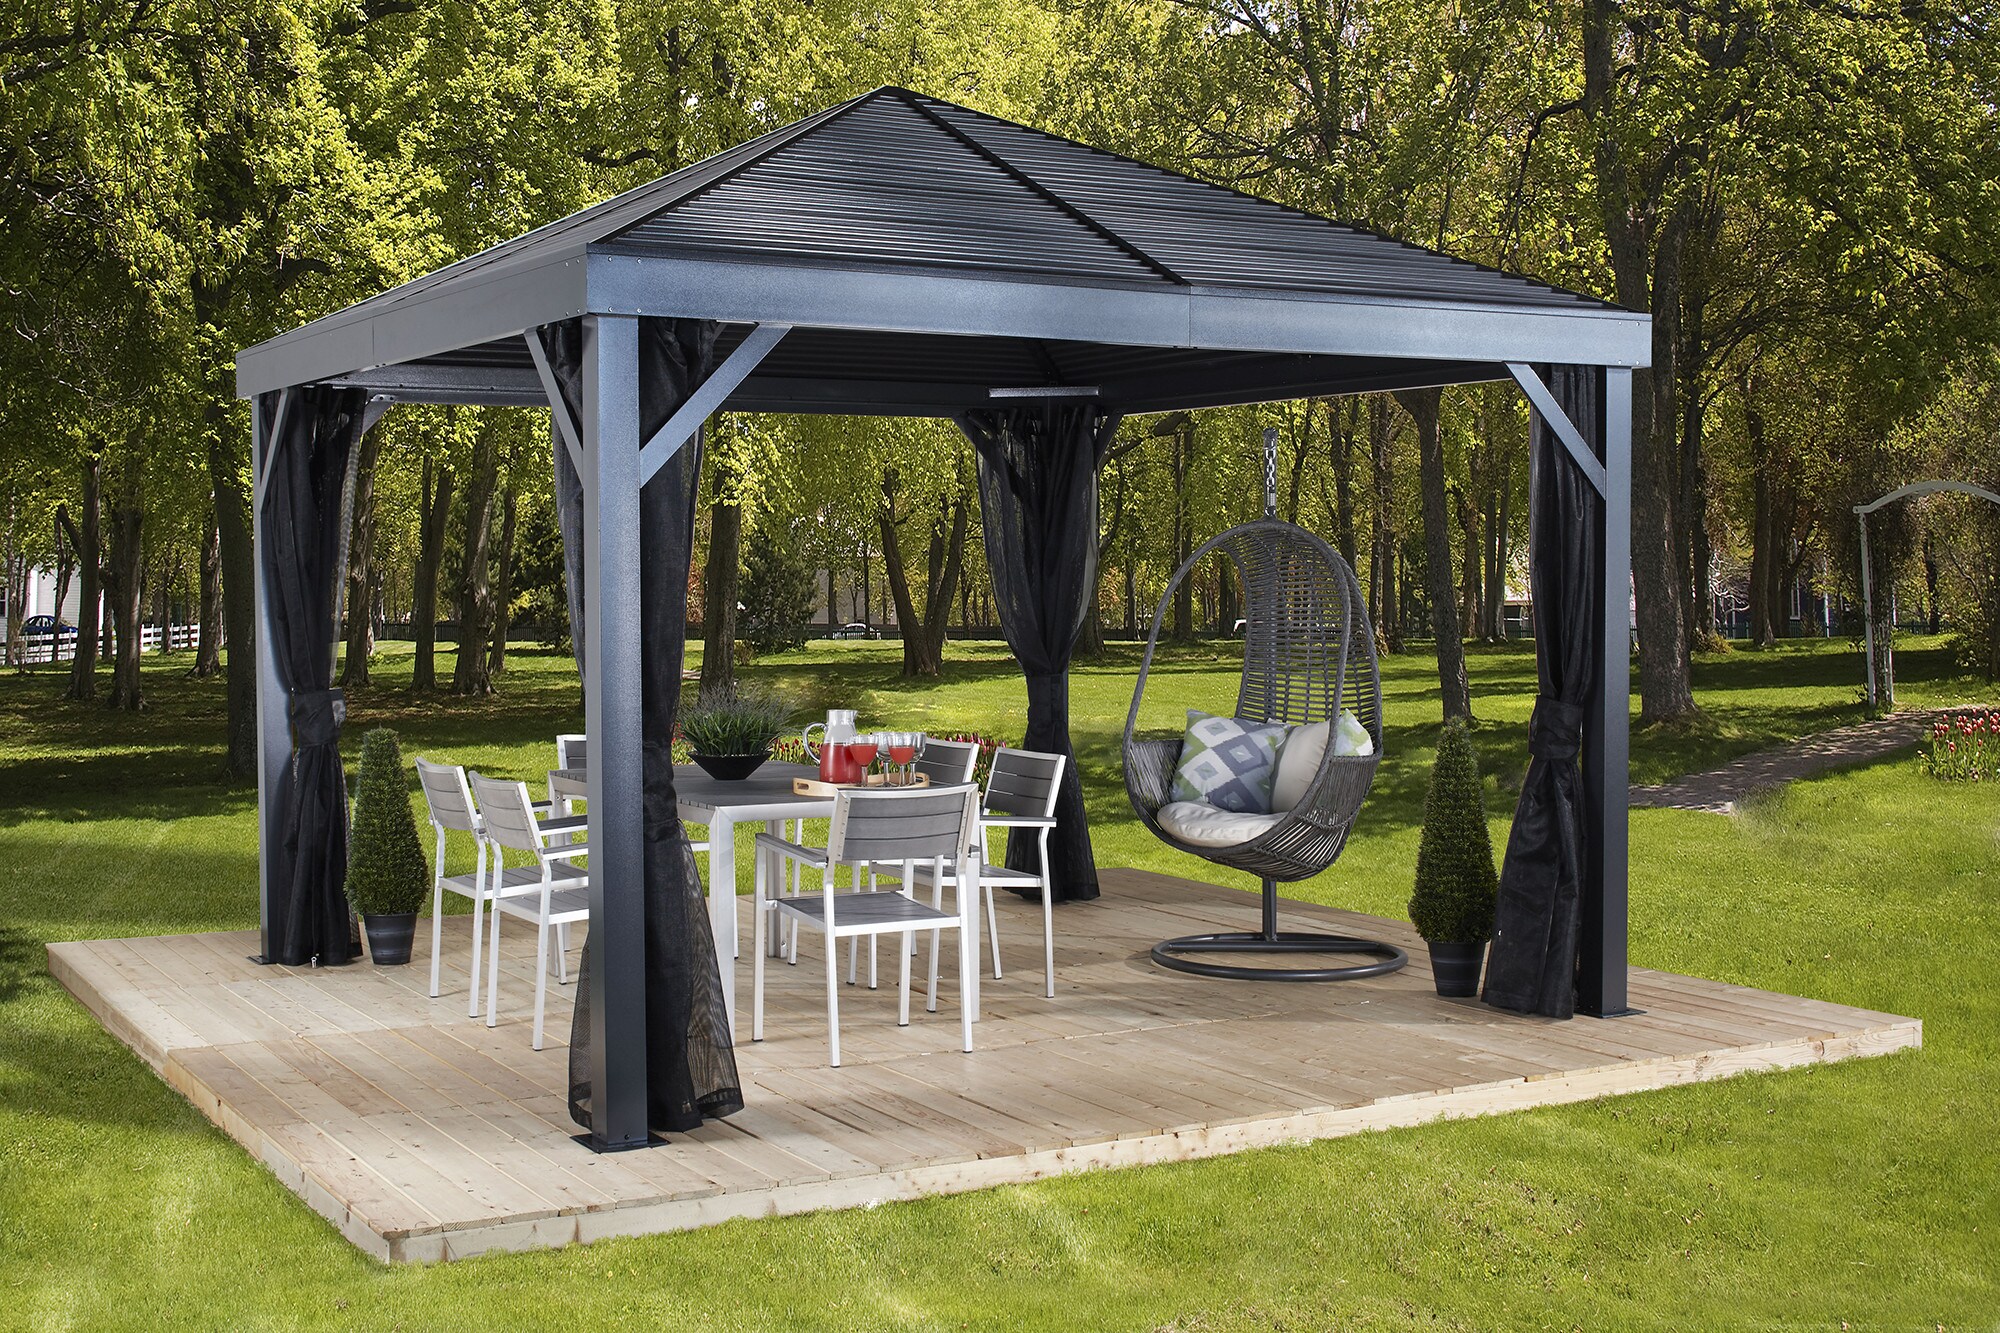 x Gazebos 12-ft 12-ft South Square department Screened the Metal Gazebo at Sojag in Beach Light Grey